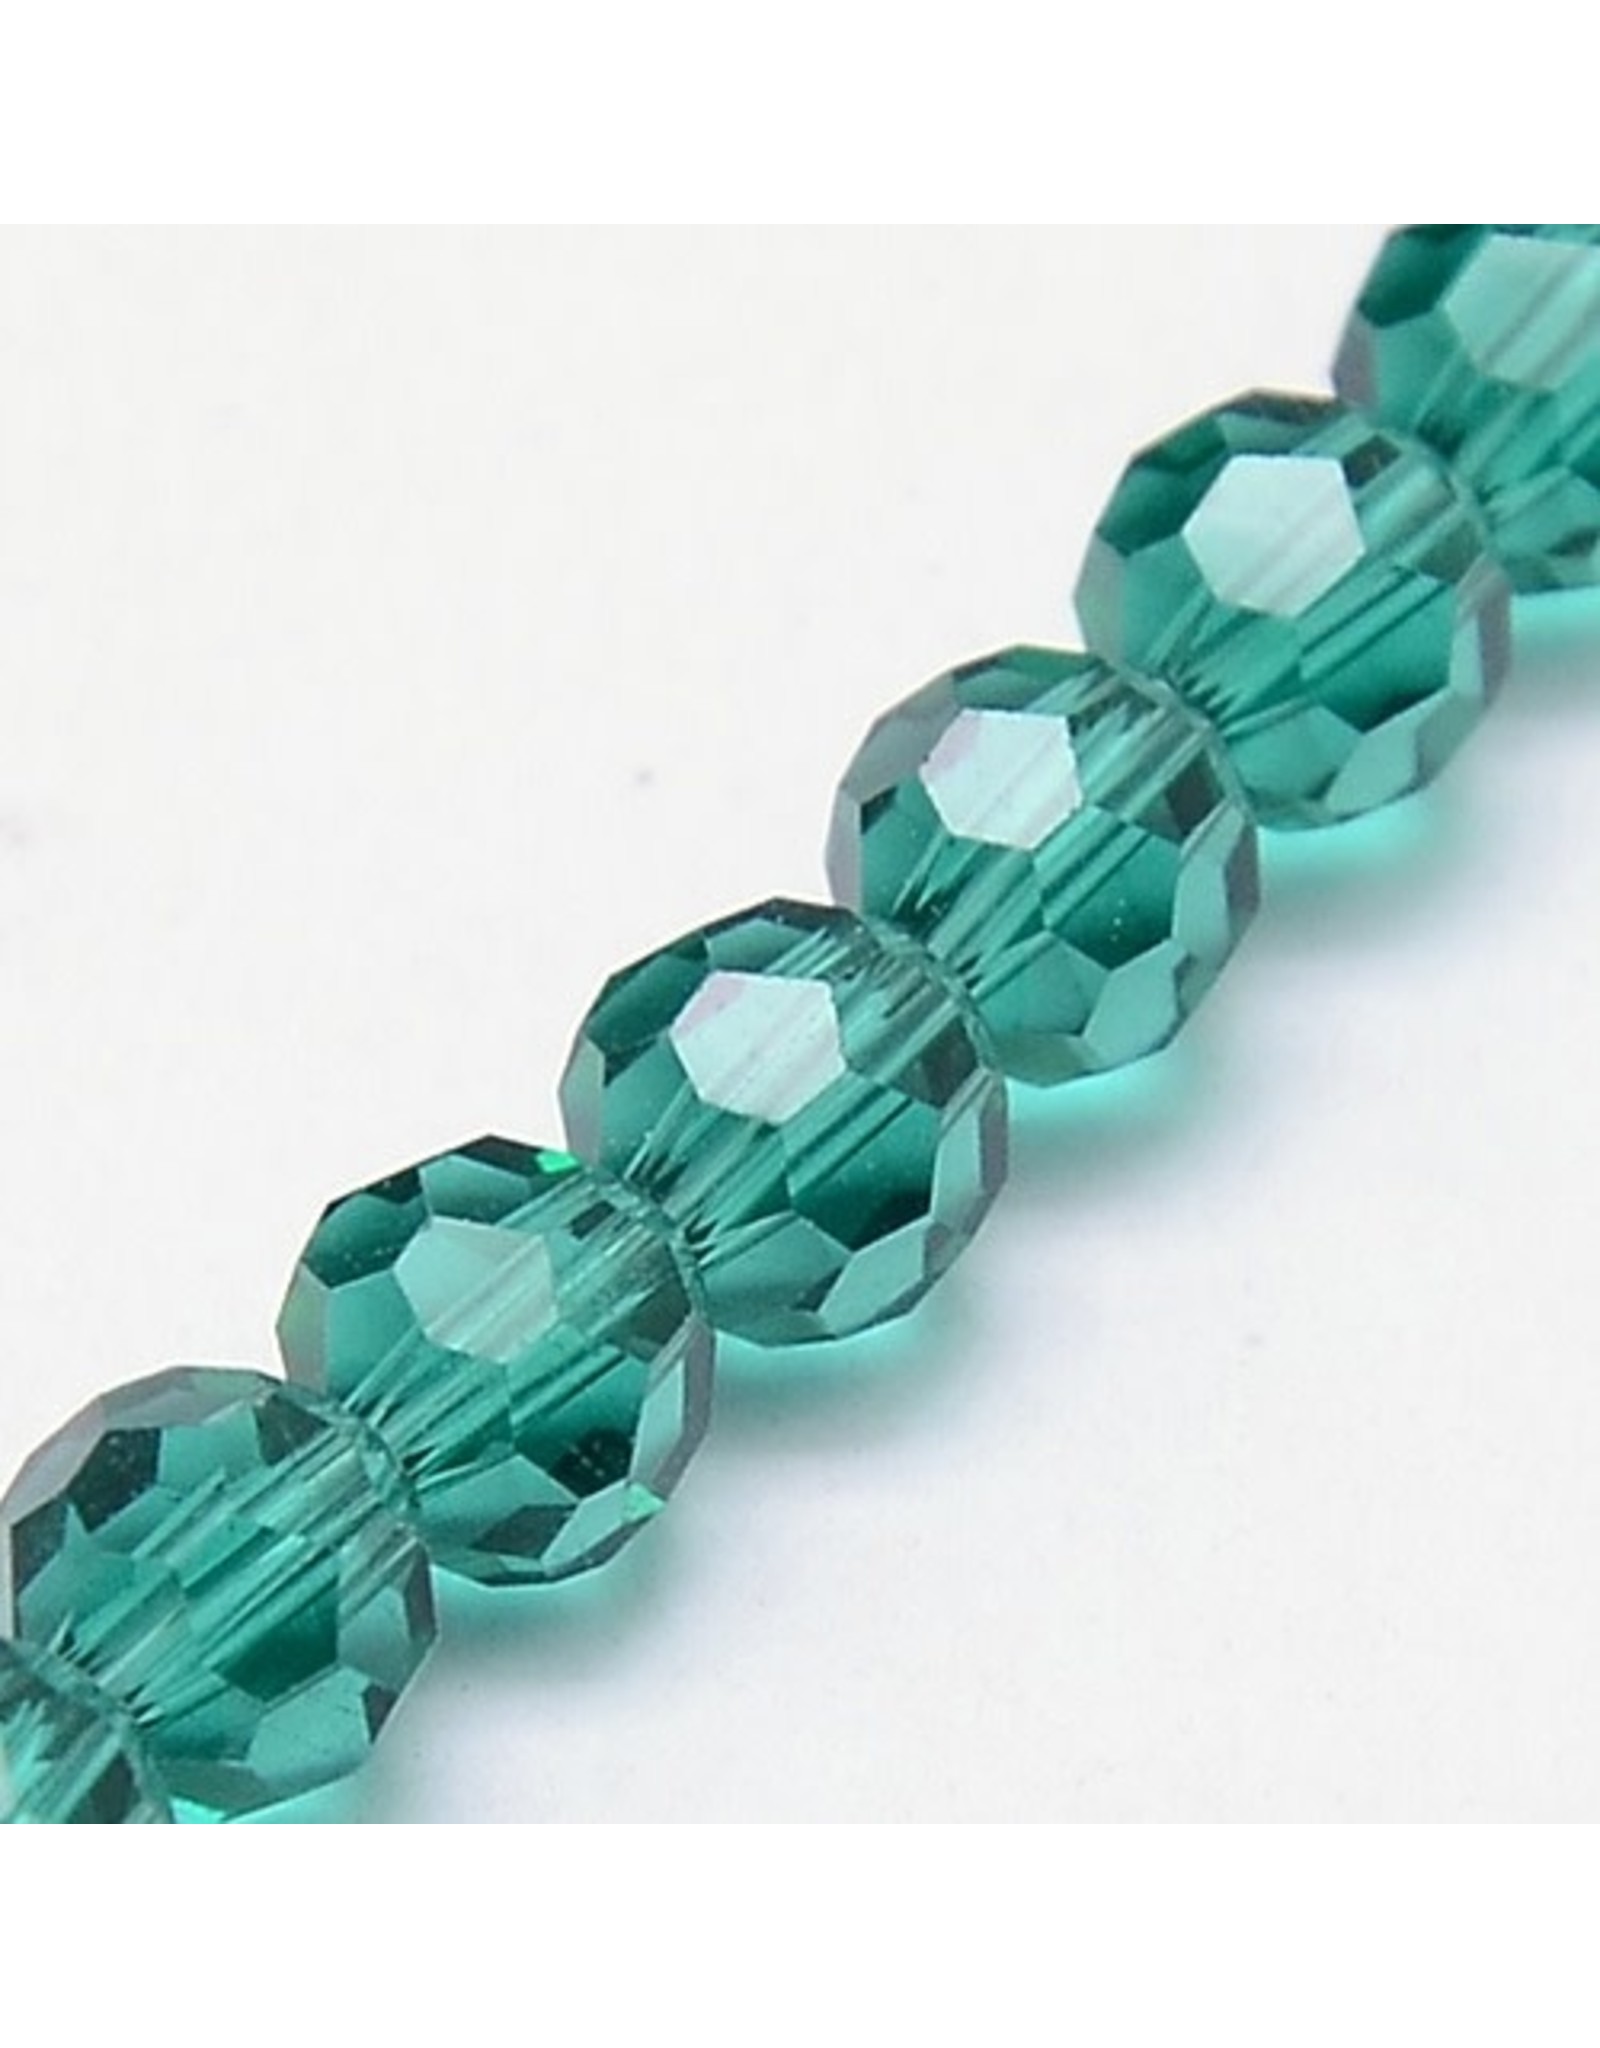 4mm Round Teal Green   x90